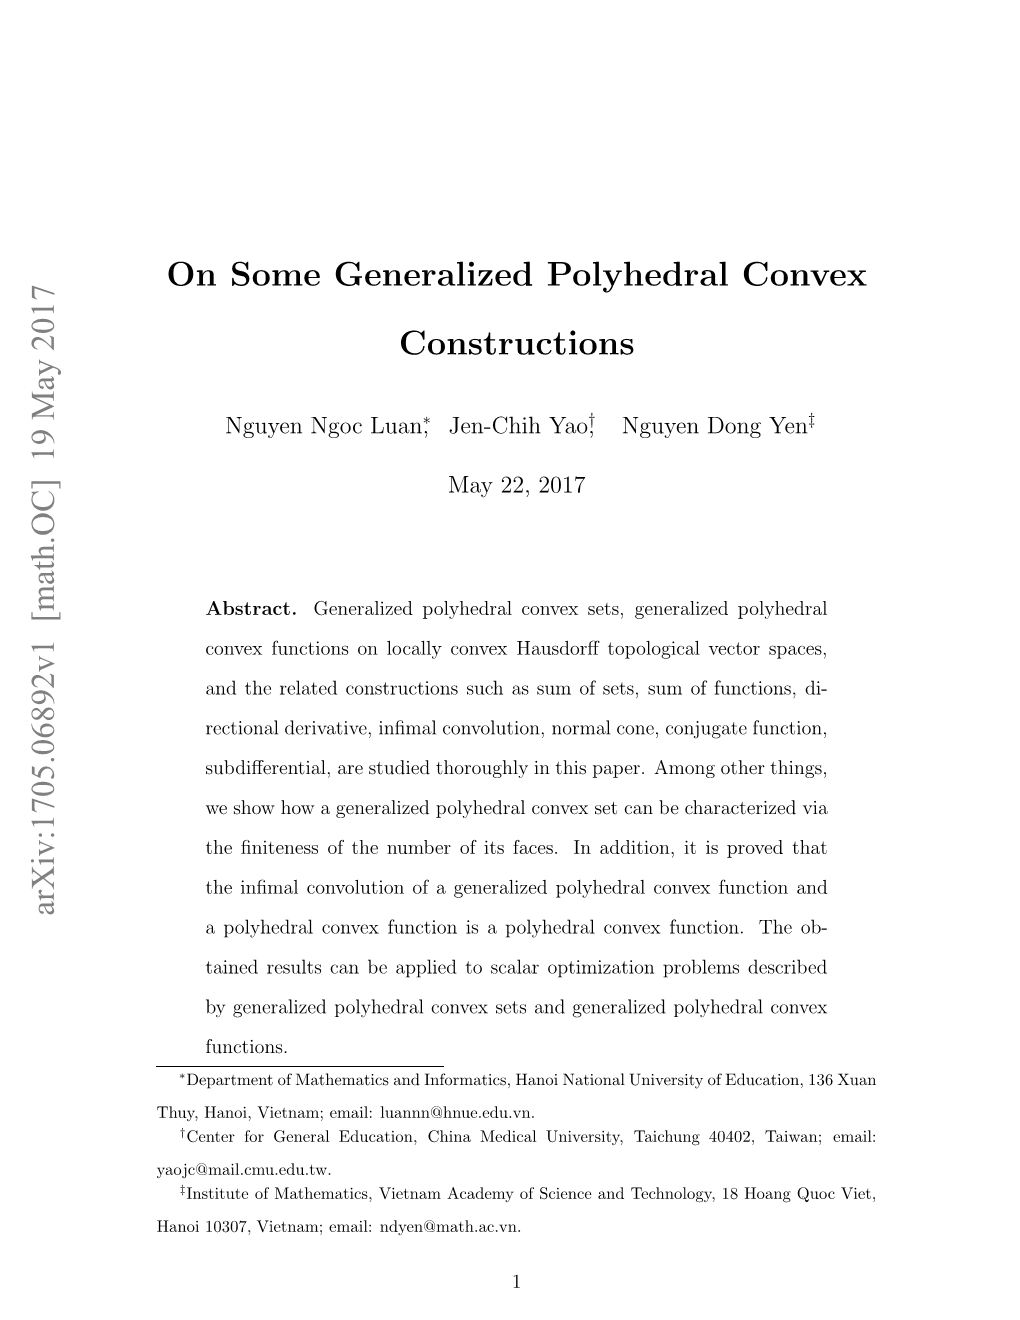 19 May 2017 on Some Generalized Polyhedral Convex Constructions